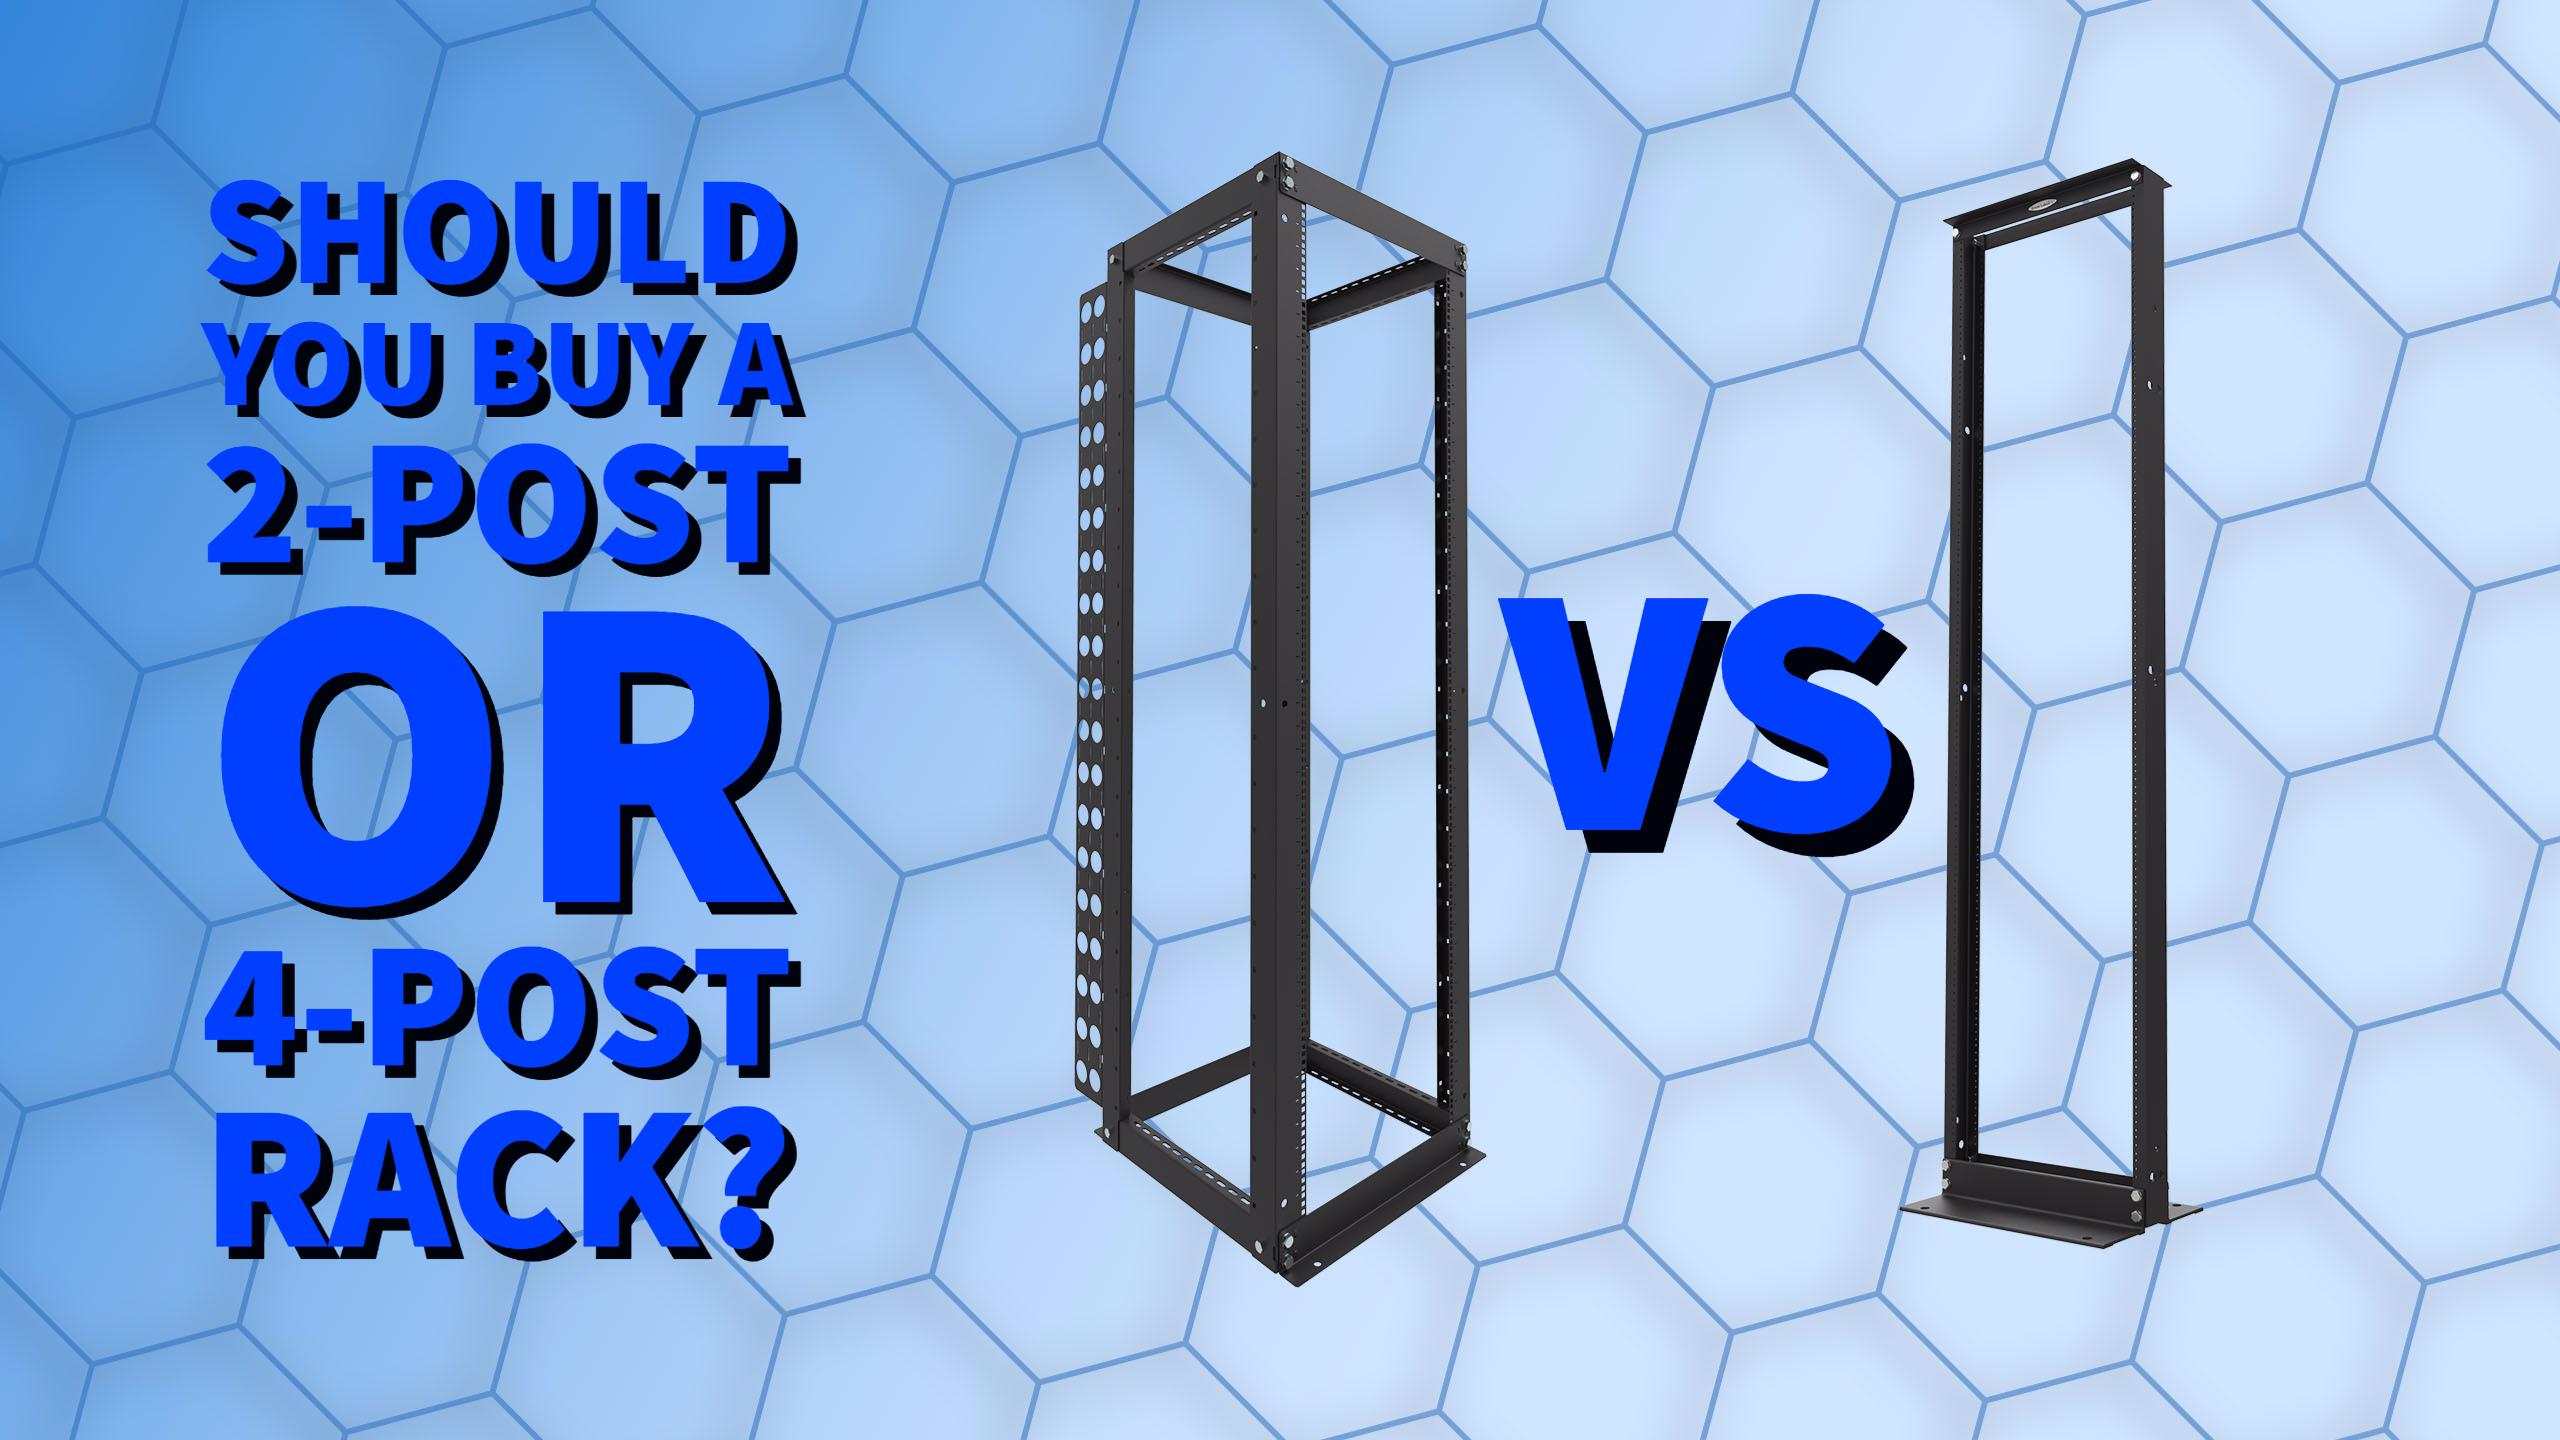 Should You Buy a 2-Post or 4-Post Rack